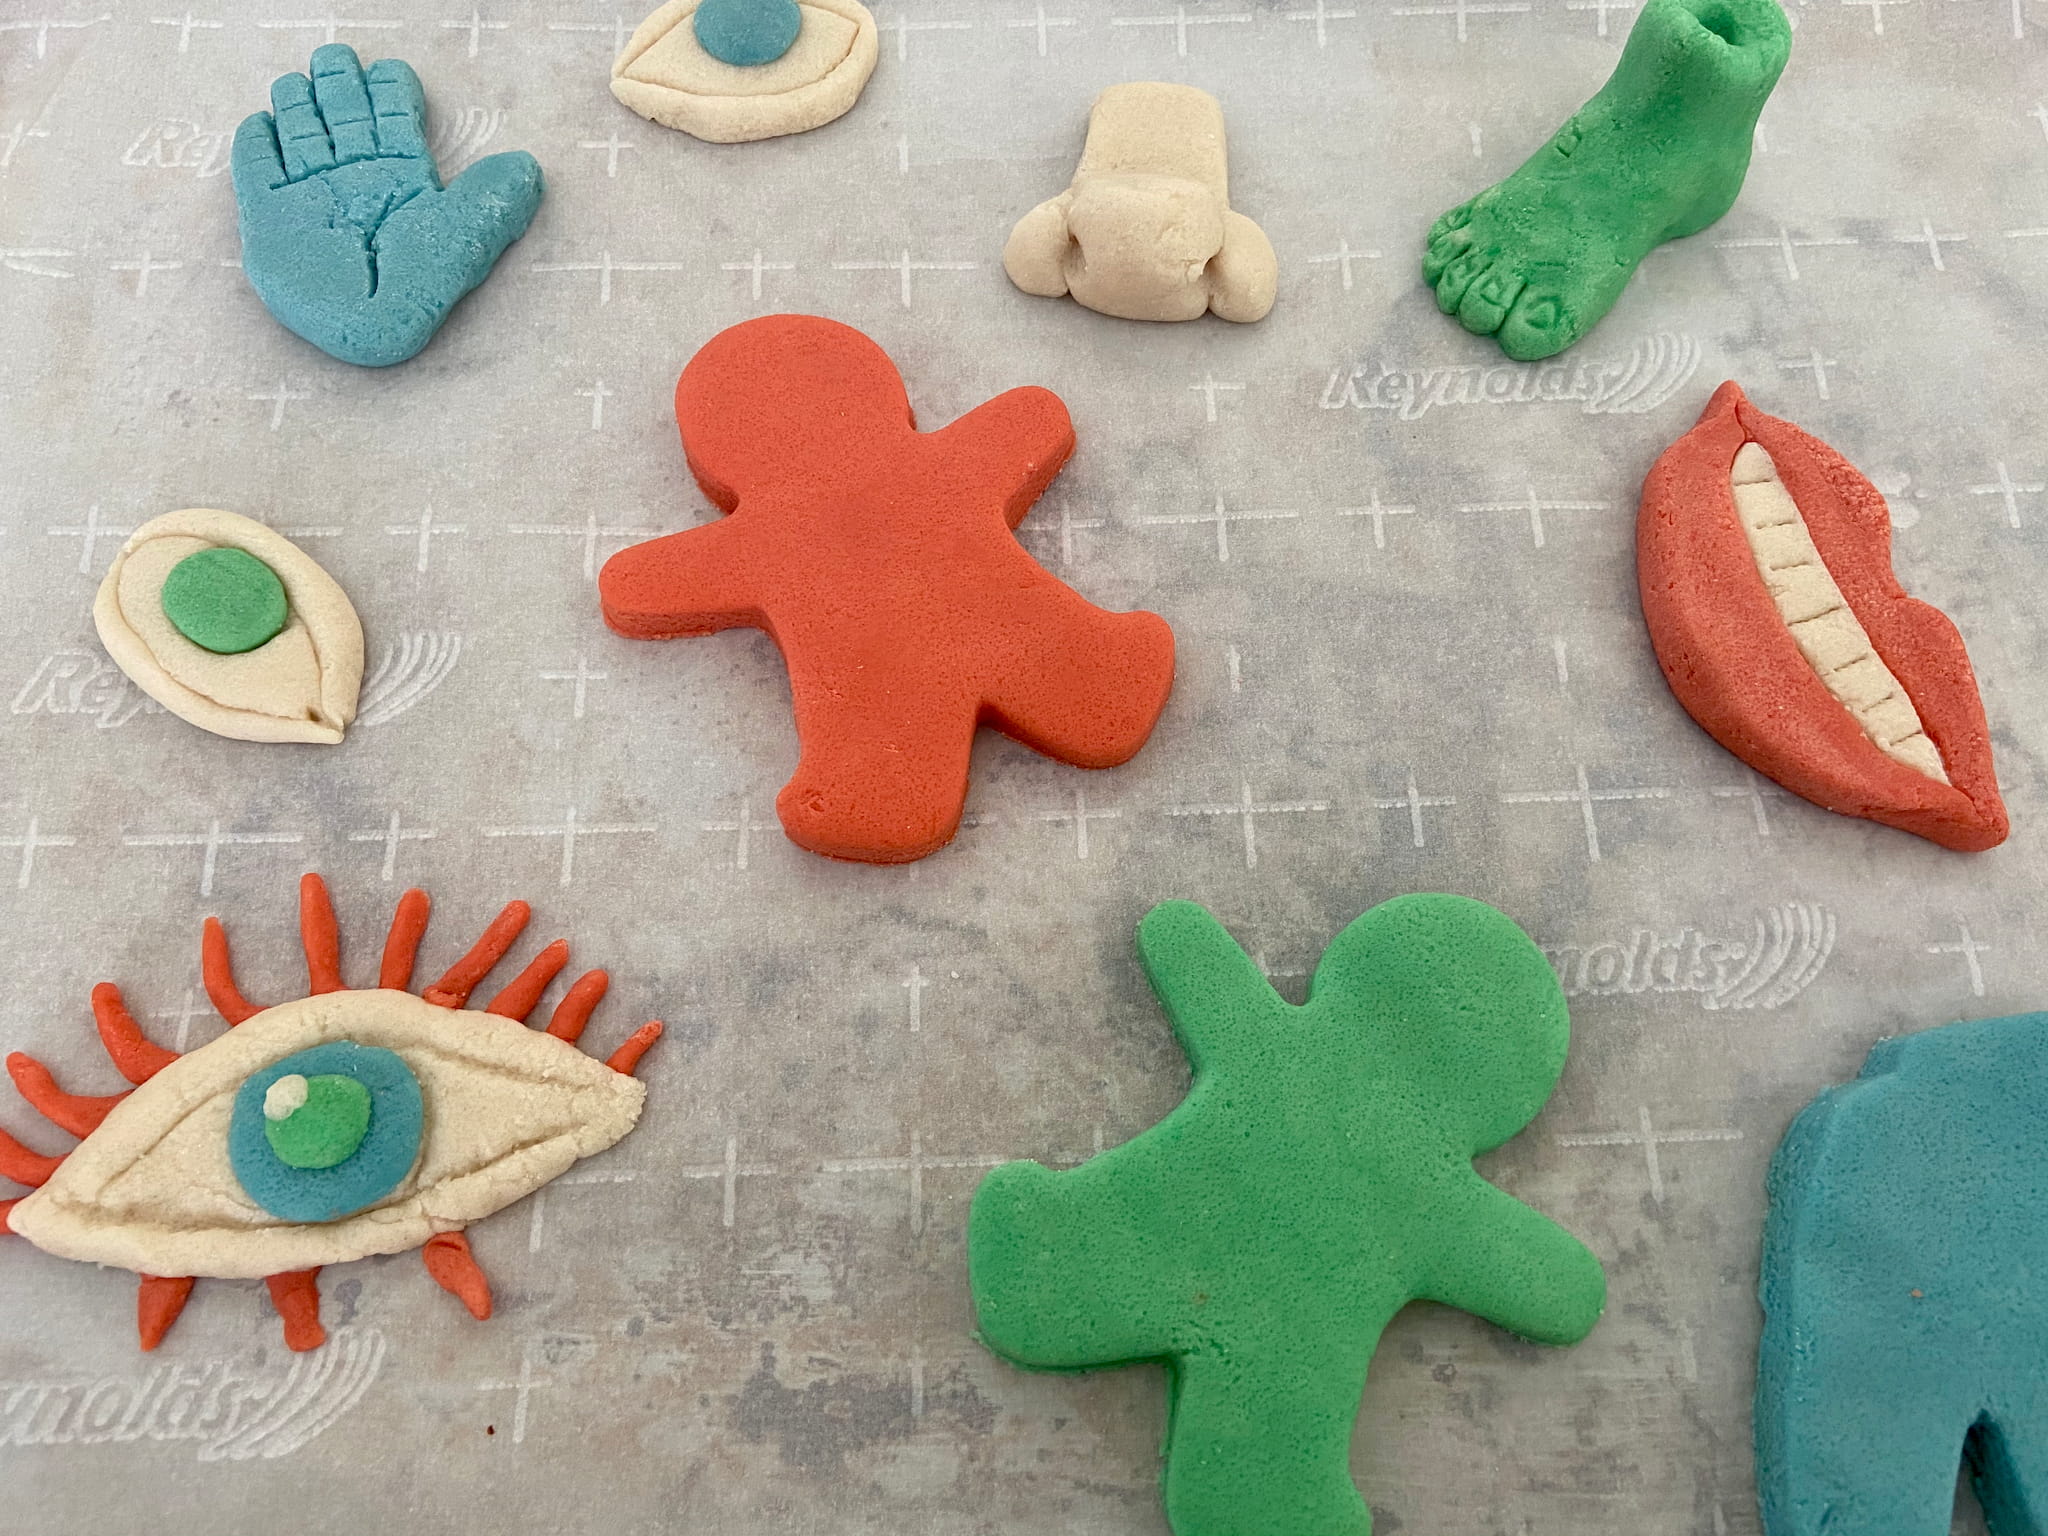 Clay Art Projects for Kids - 3 Simple Ingredients - Saving Cent by Cent